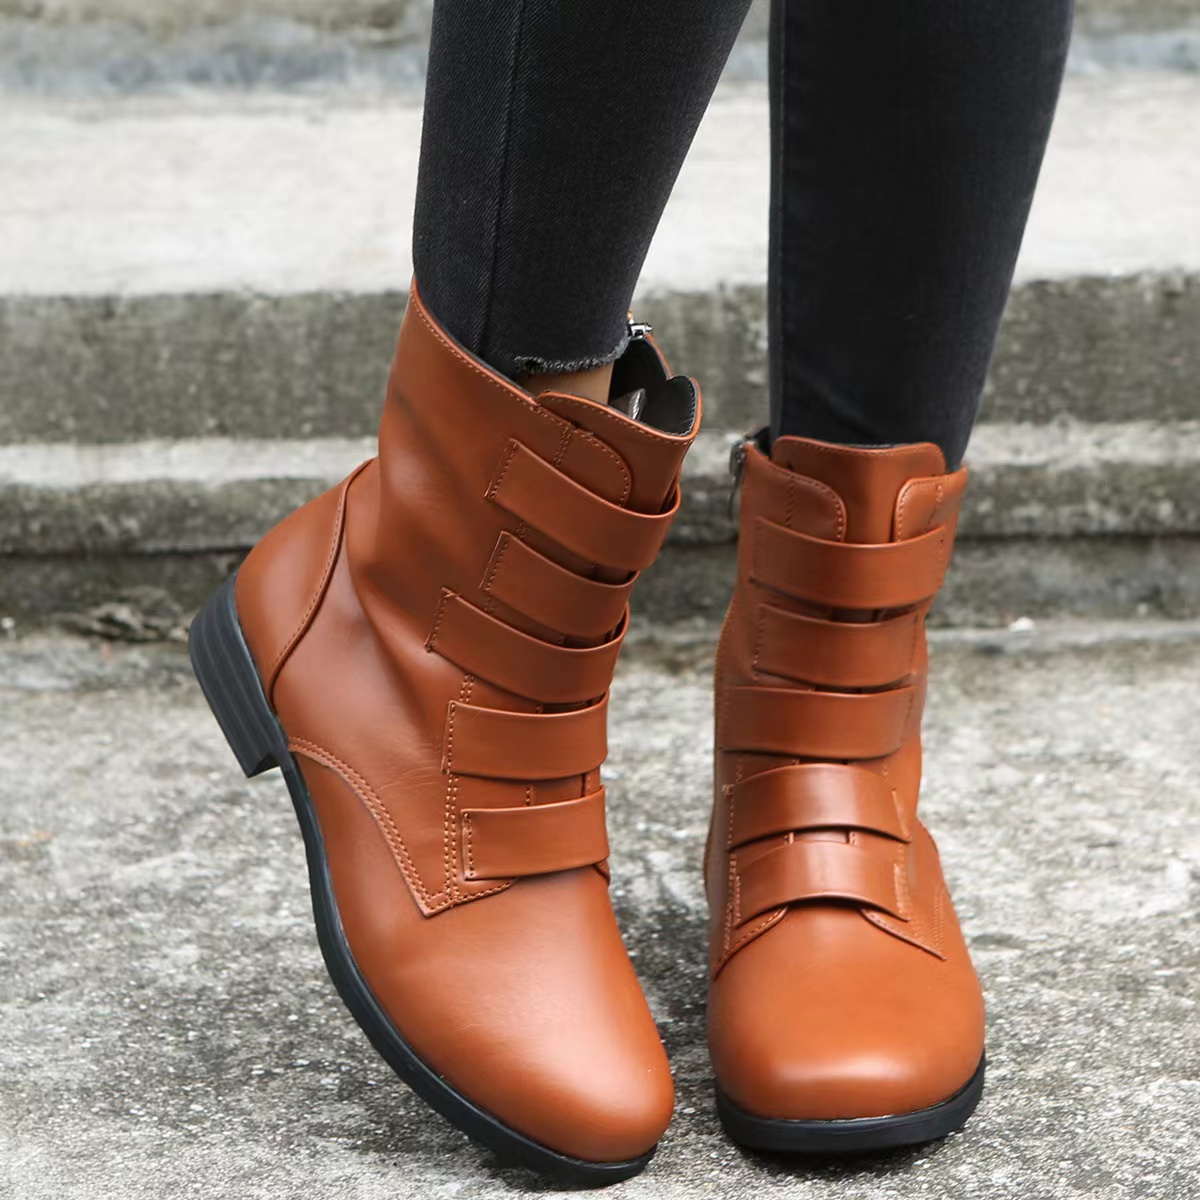 Mid-leg Boots, Round Toe Flat Leather Boots,women's Boots